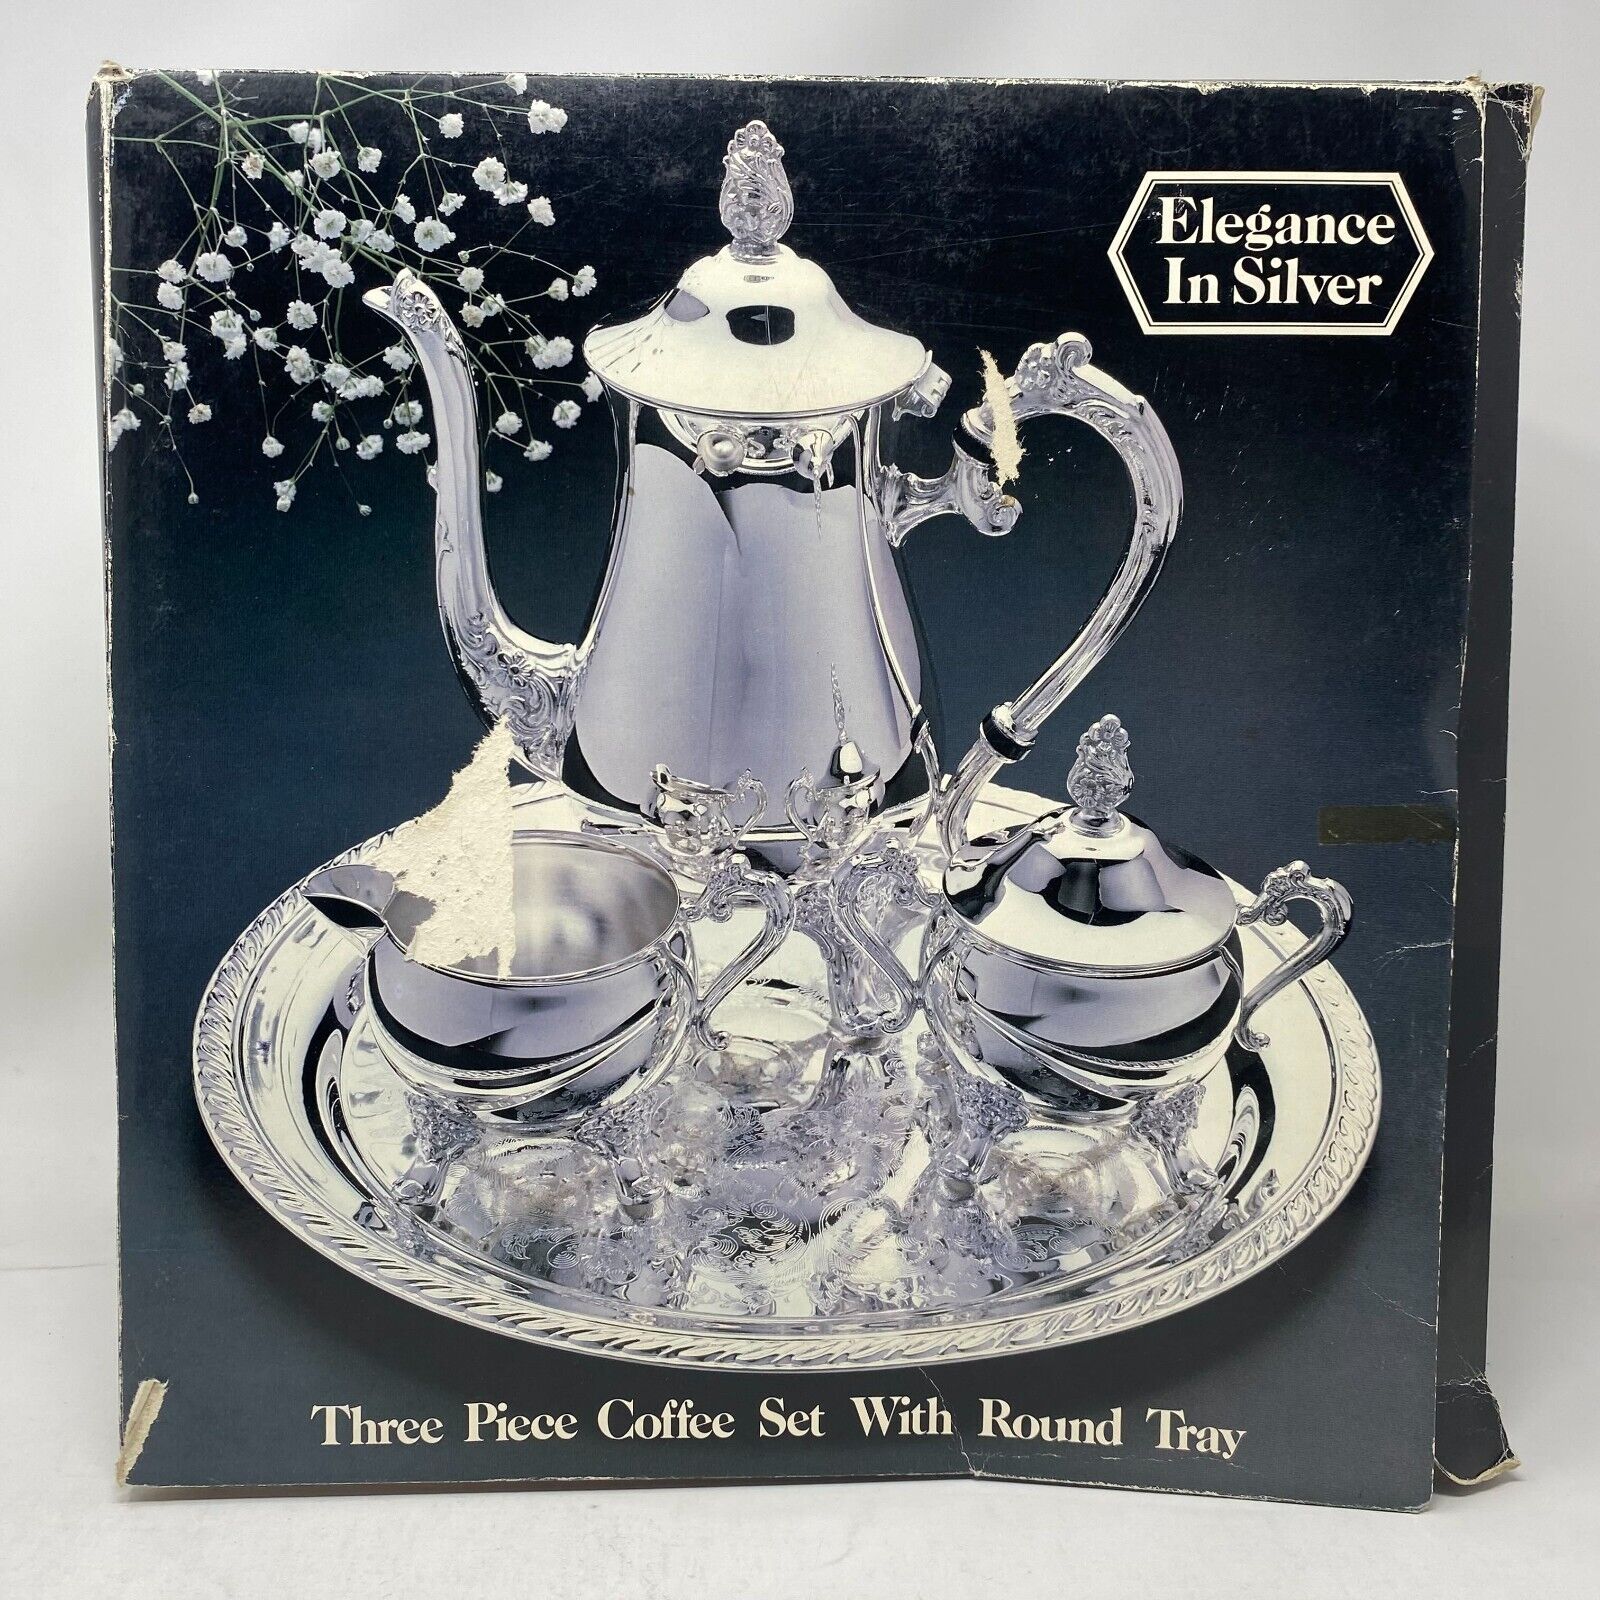 Elegance In Silver Three Piece Tea Coffee Set Round Tray Silver Plated With Box